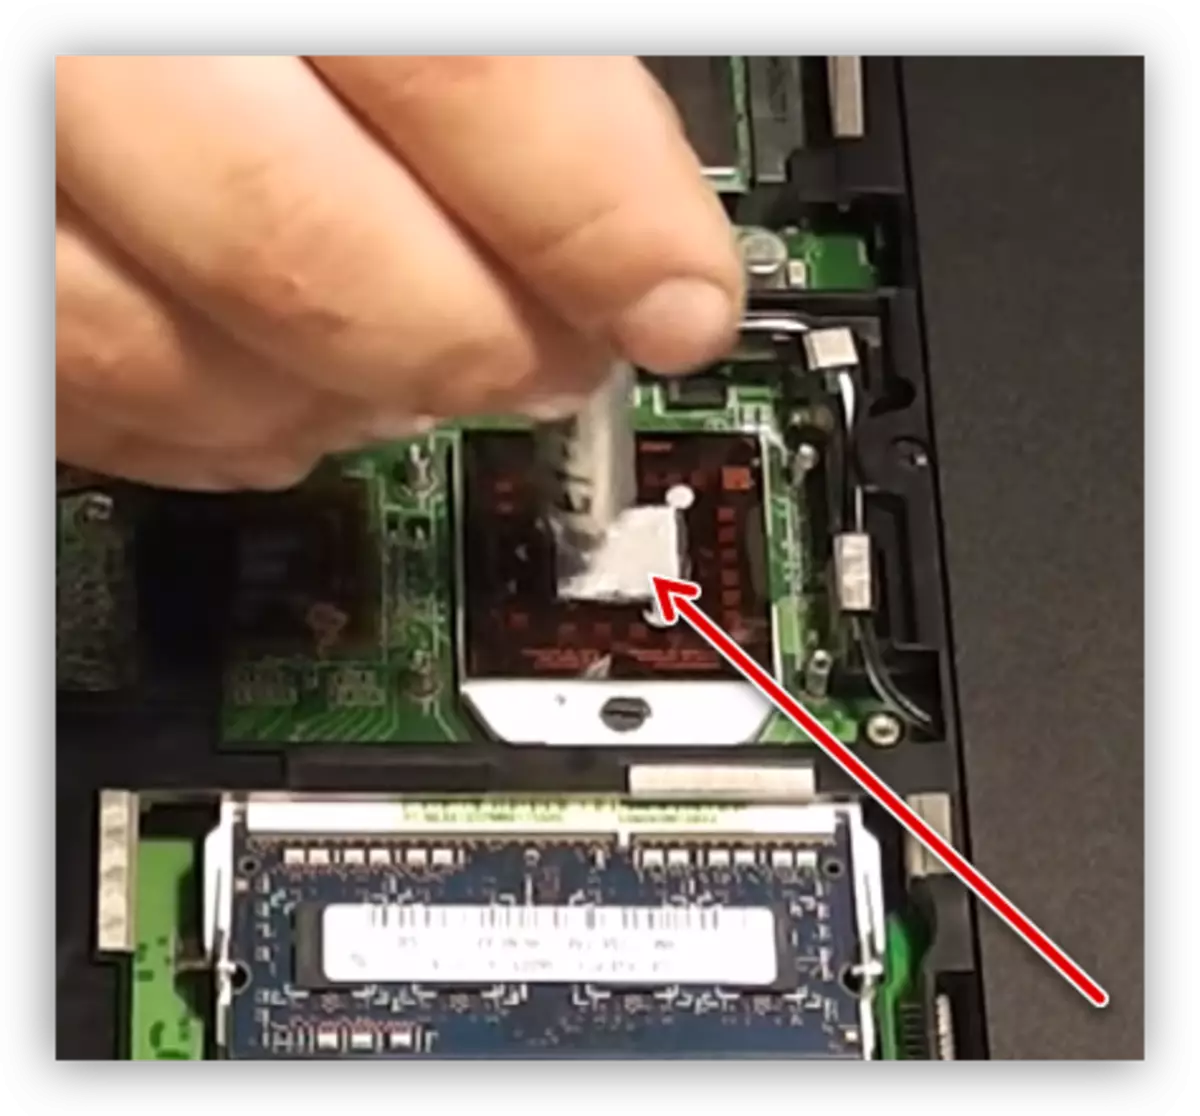 Applying a new thermal paste on a laptop processor